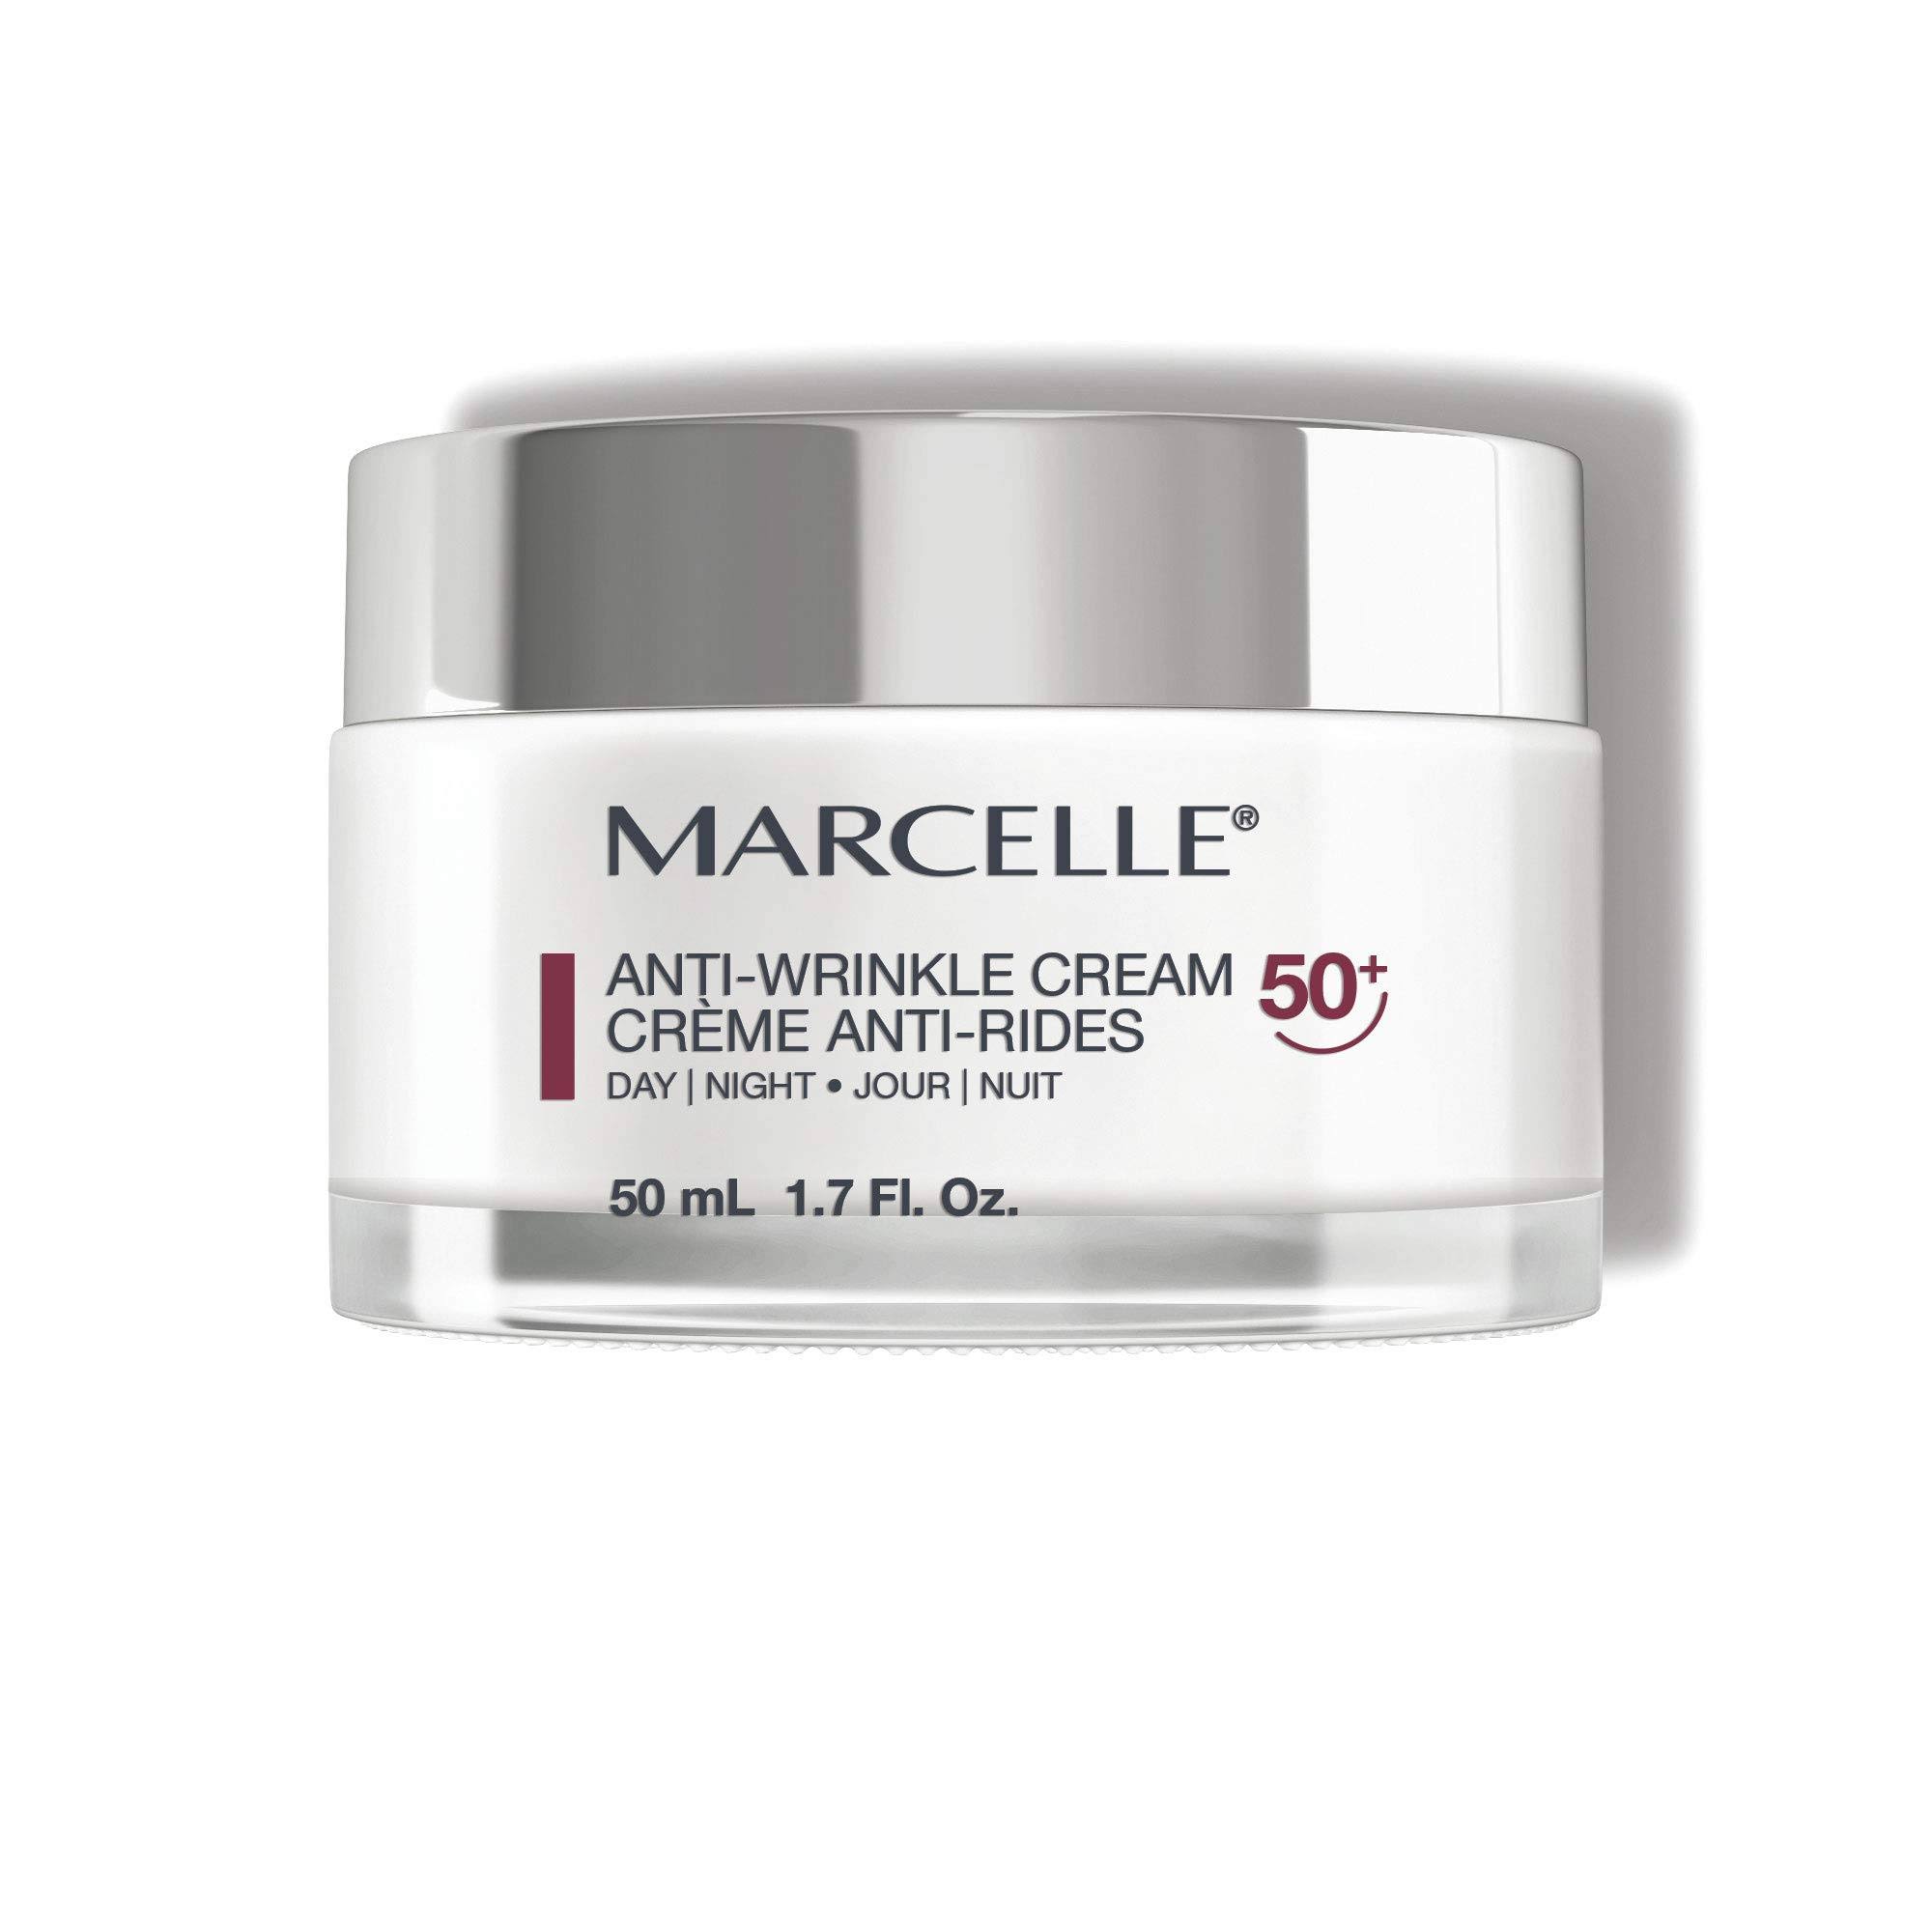 Marcelle Anti-Wrinkle Cream, Ages 50, 1.7 Ounces